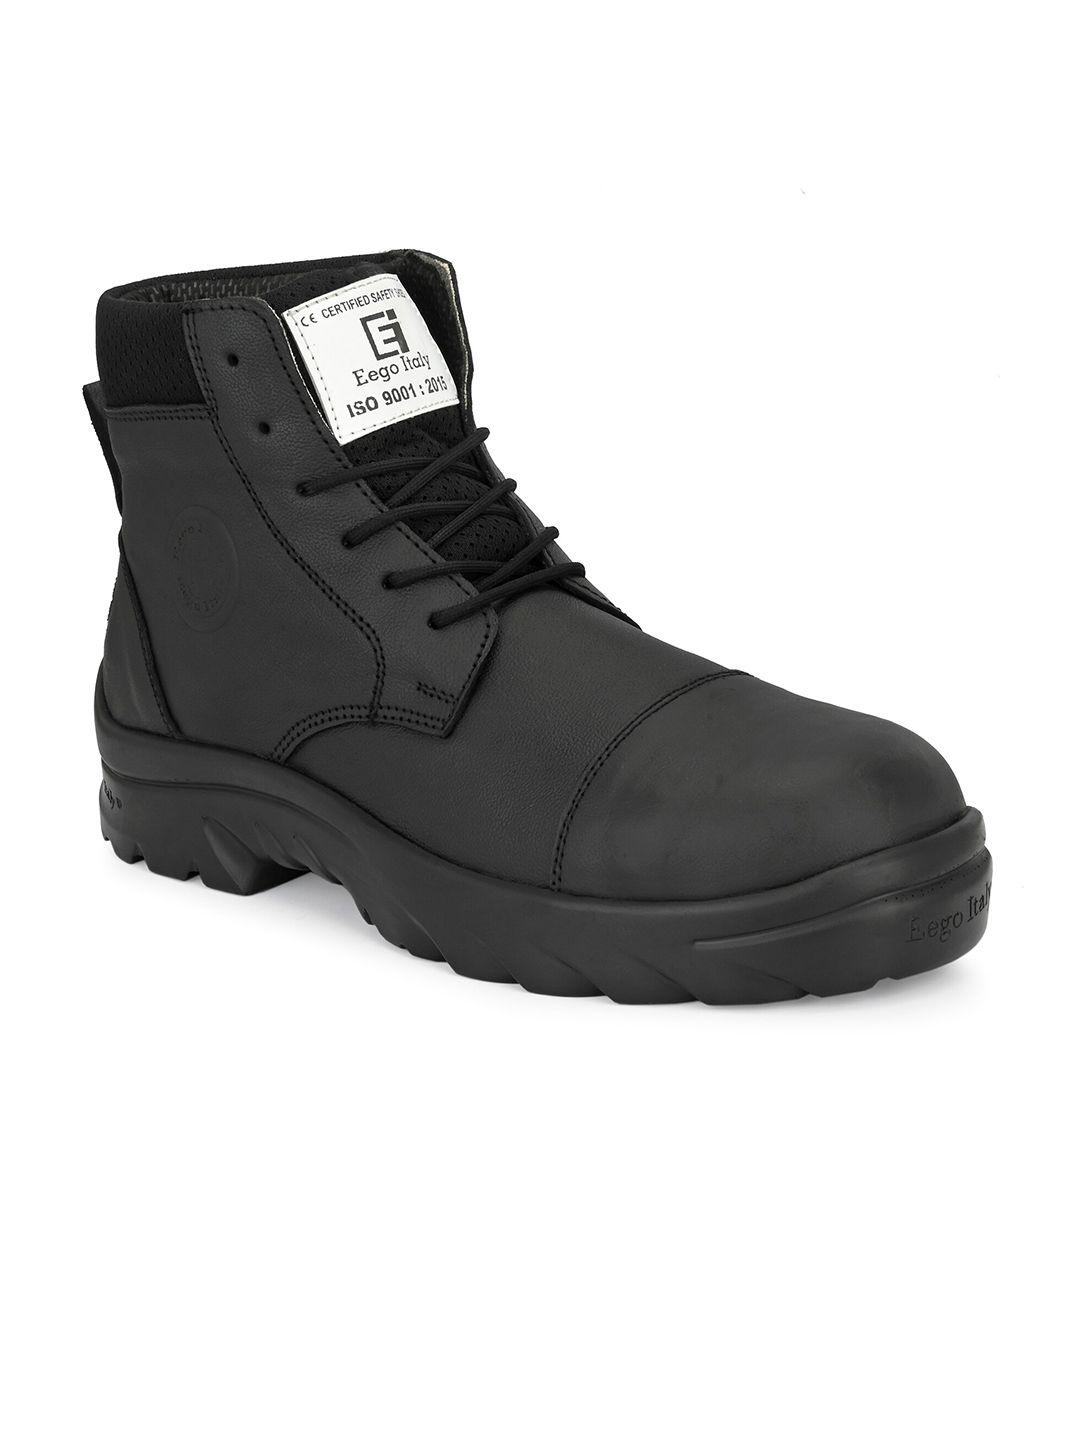 eego italy men black solid leather industrial safety shoes